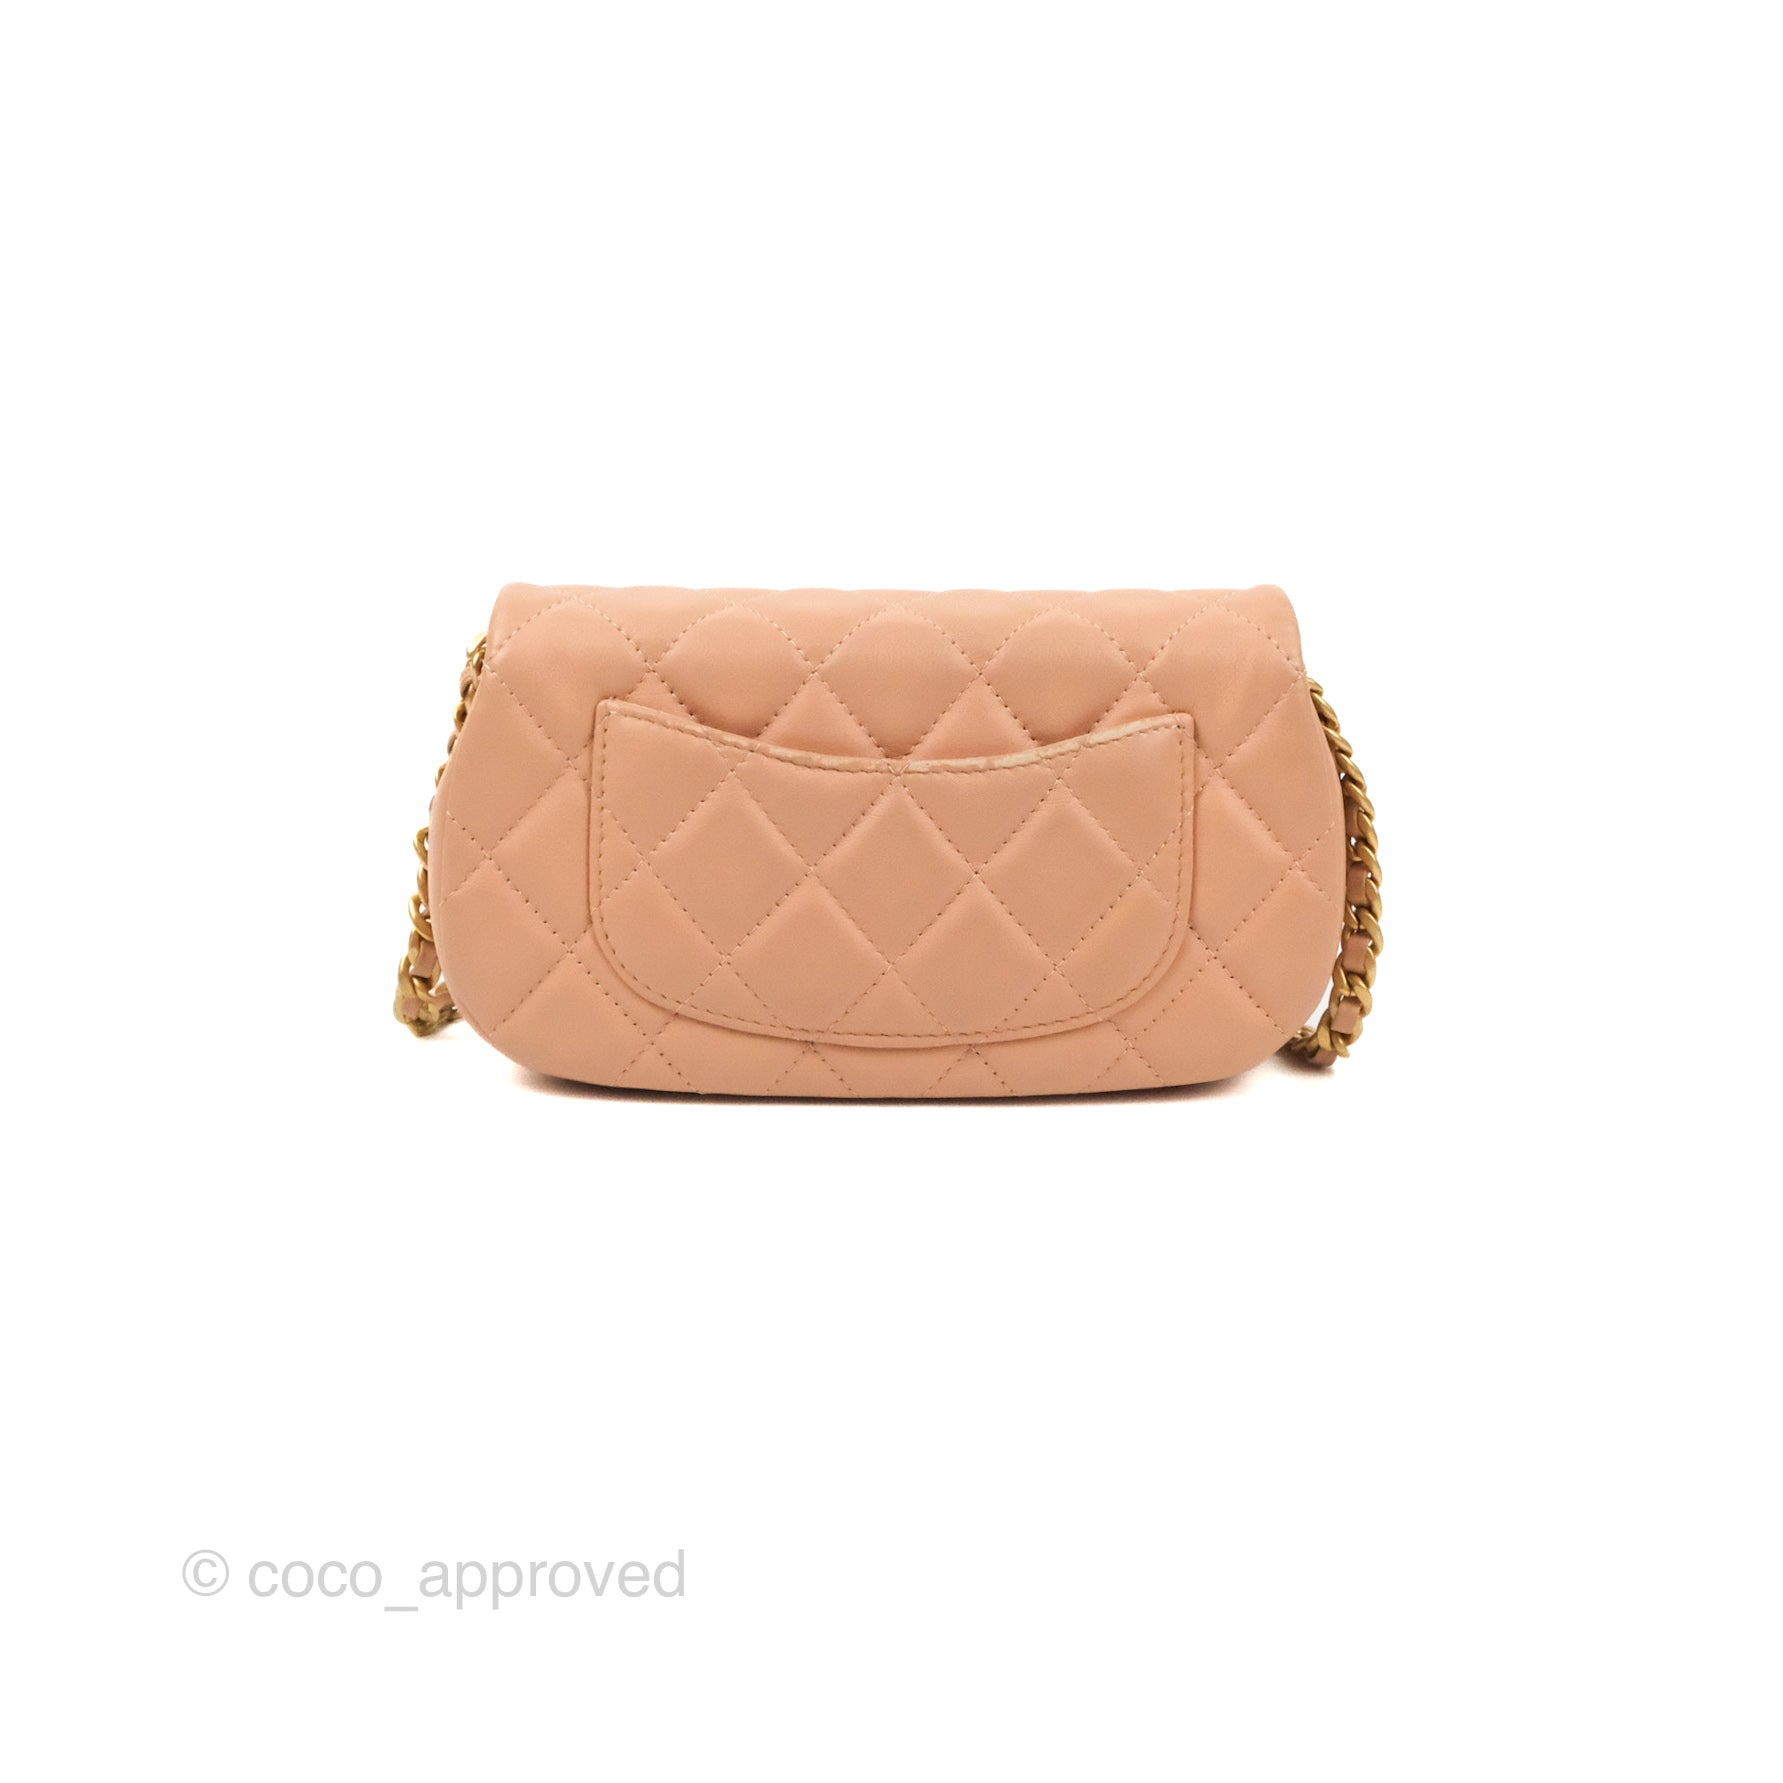 At Auction: Chanel Beige Quilted Aged Calfskin Chain Shoulder Tote